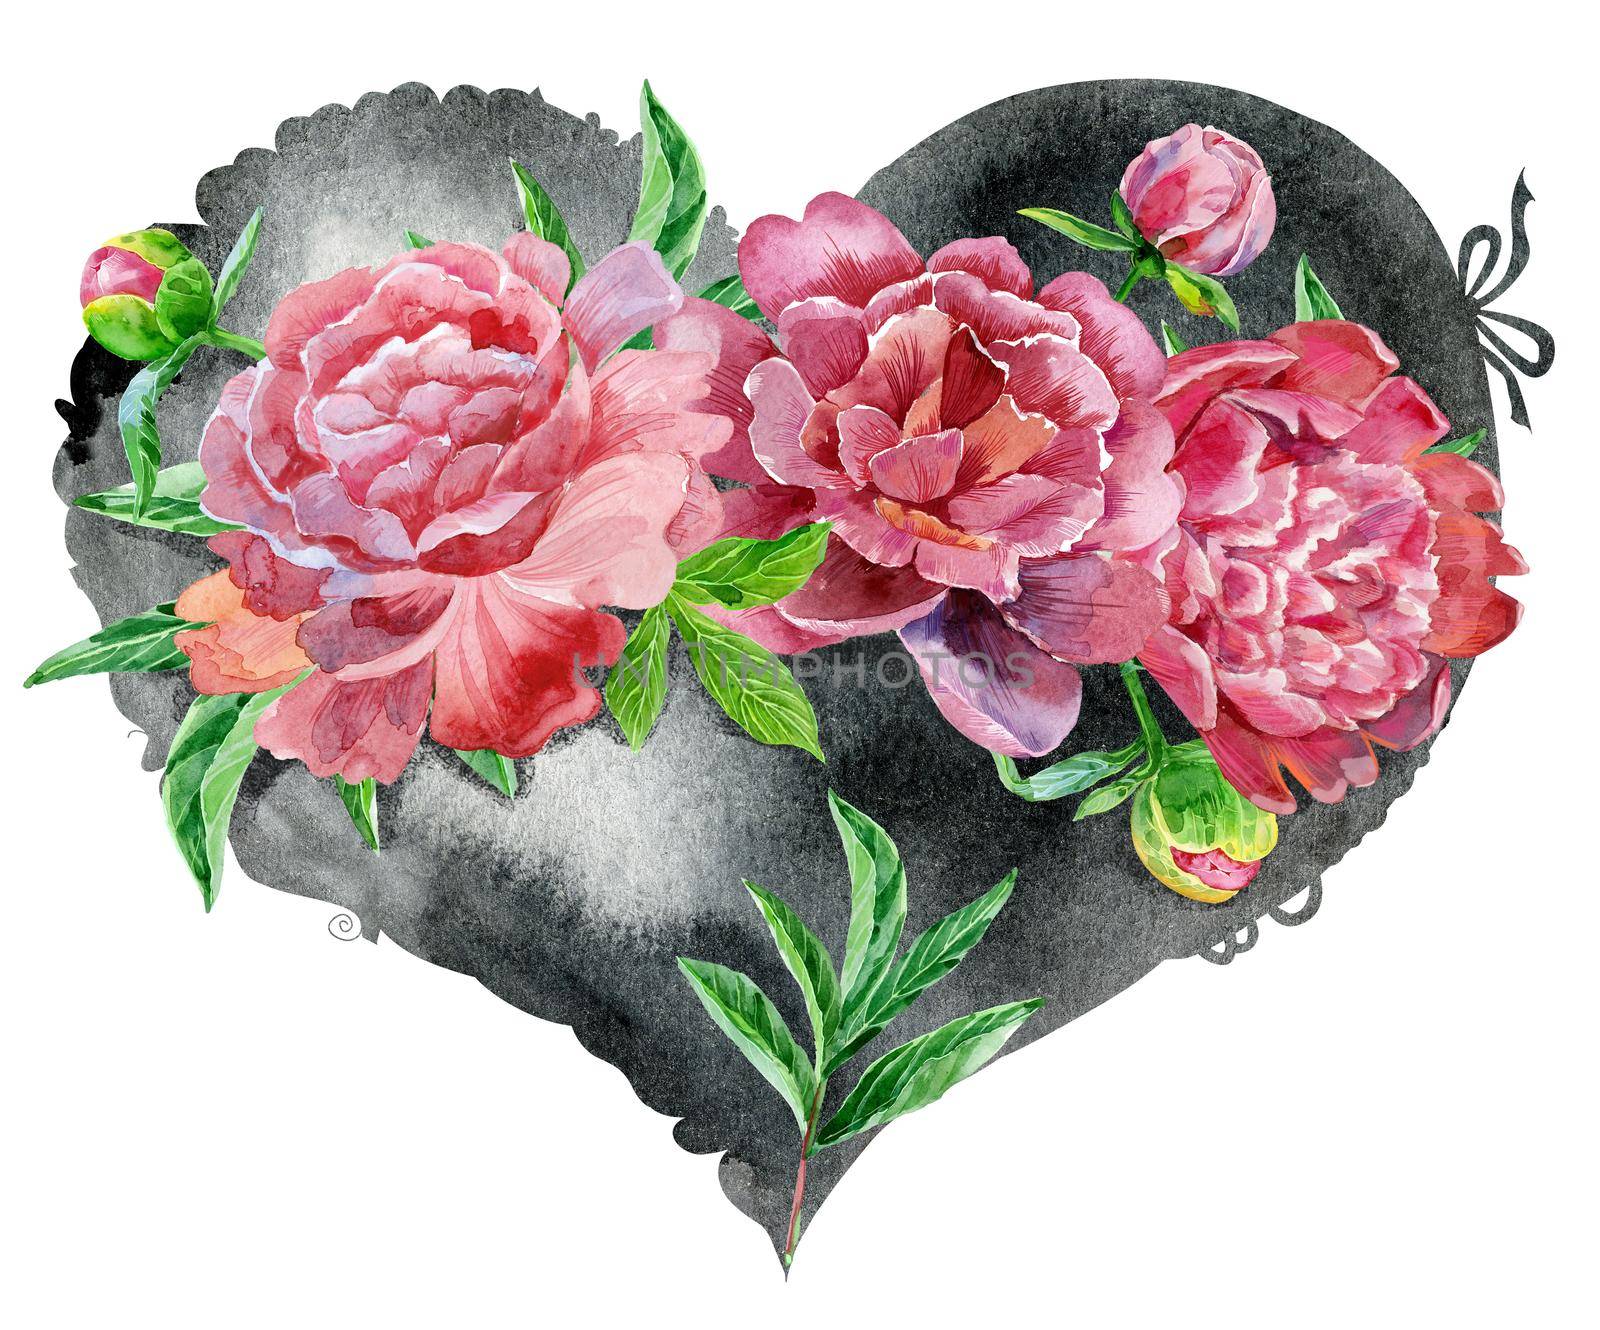 watercolor black heart with red peonies by NataOmsk